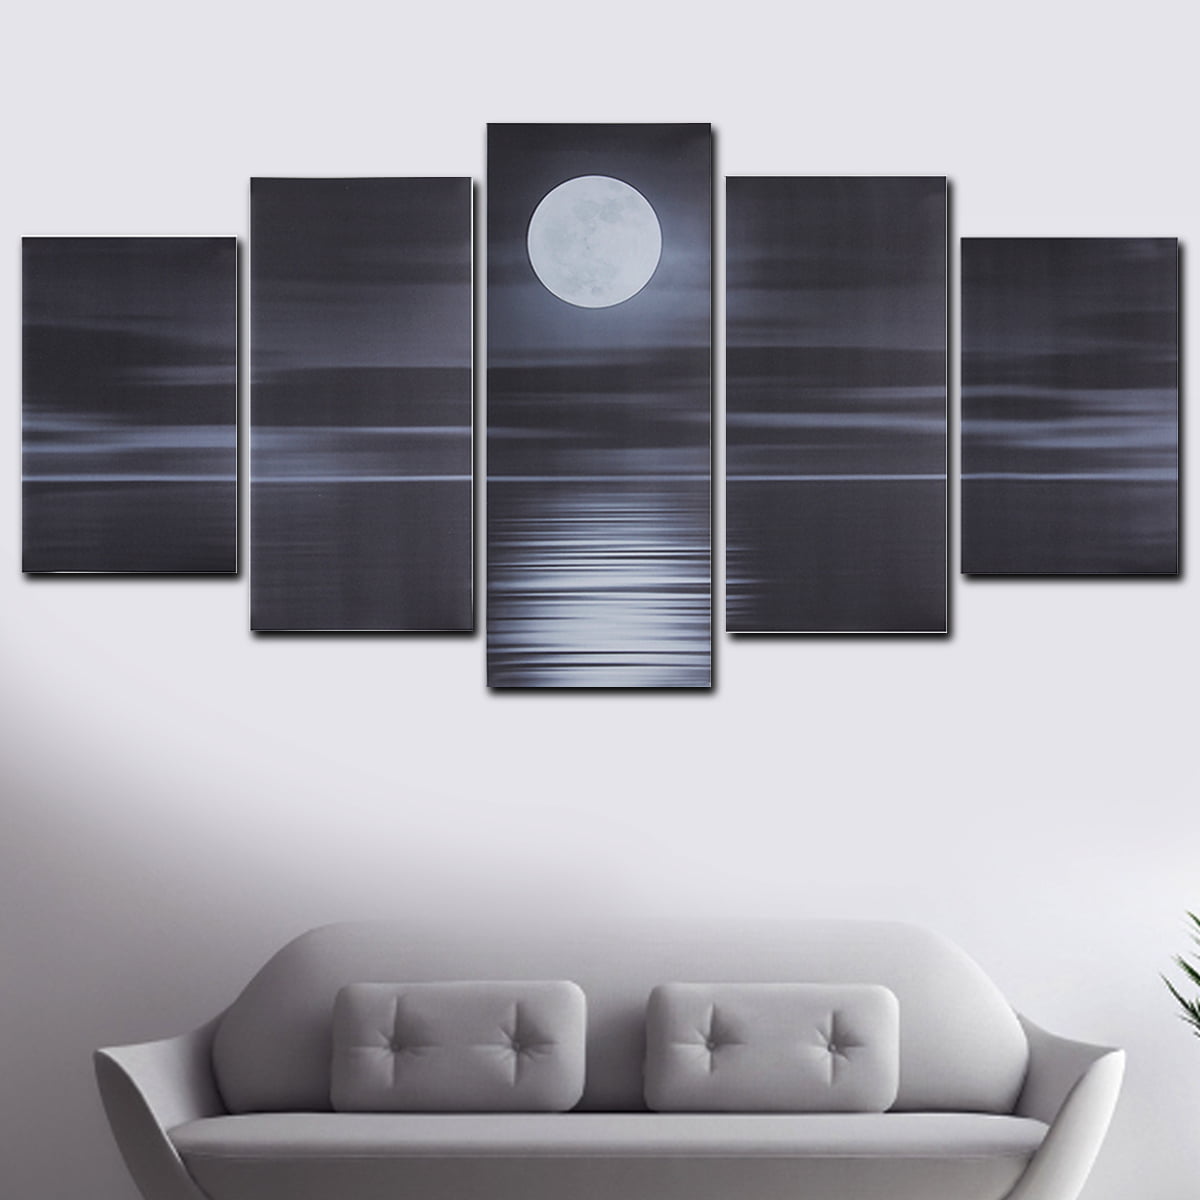 5 Panels Unframed Modern Canvas Art Oil Painting Picture Room Wall Hanging Decor